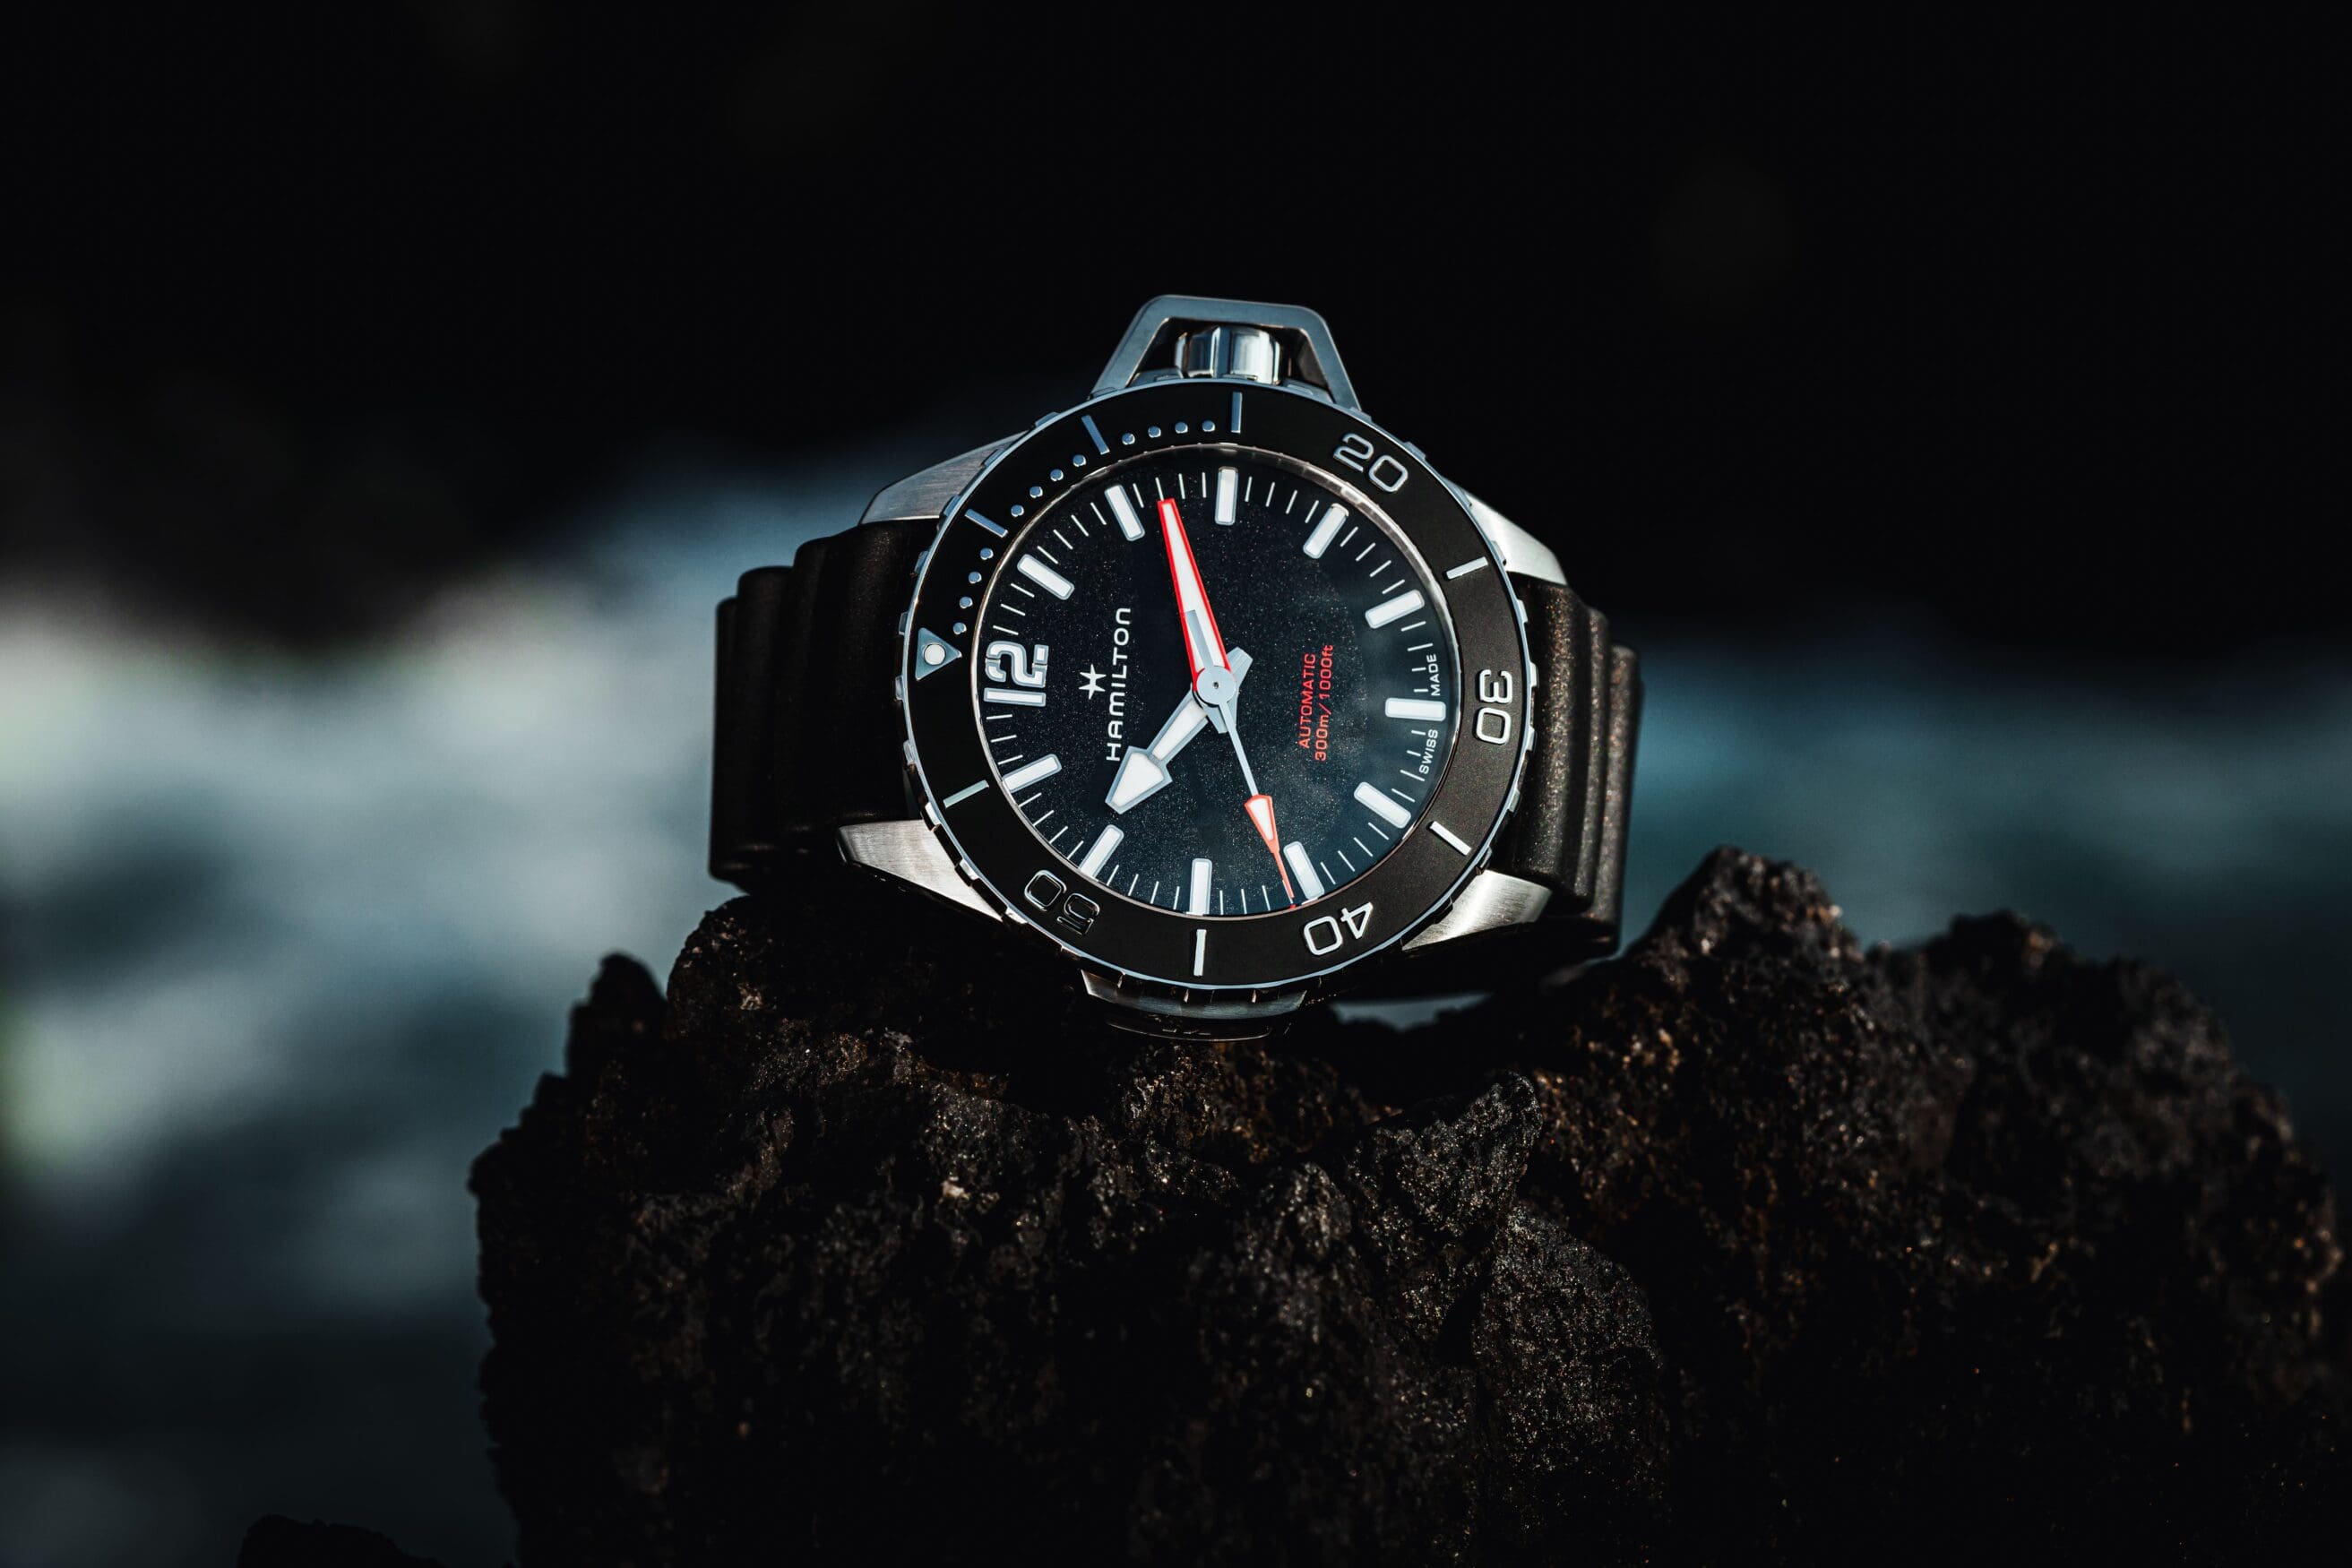 INTRODUCING: The Hamilton Khaki Navy Frogman Automatic 46mm is a supersized tool watch that’s built for action